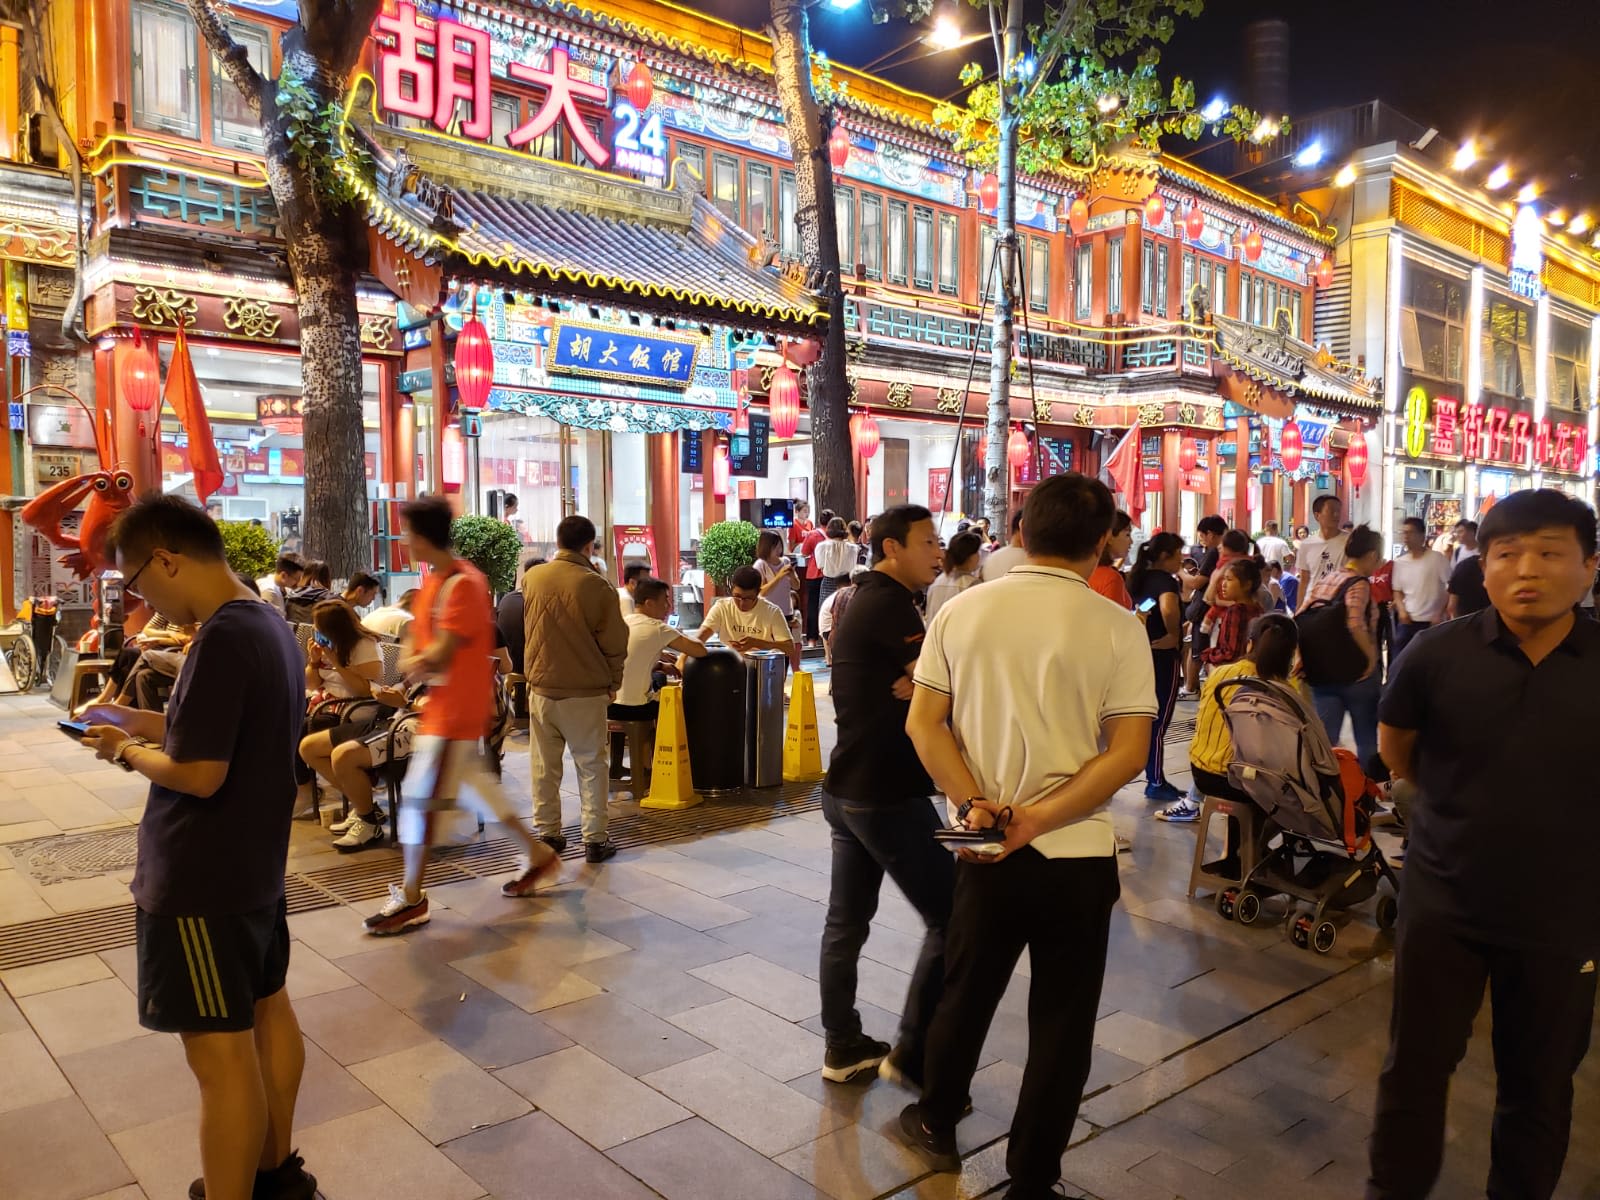 An Undercover Look at the Billion-Dollar Fake Goods Market of Chinatown